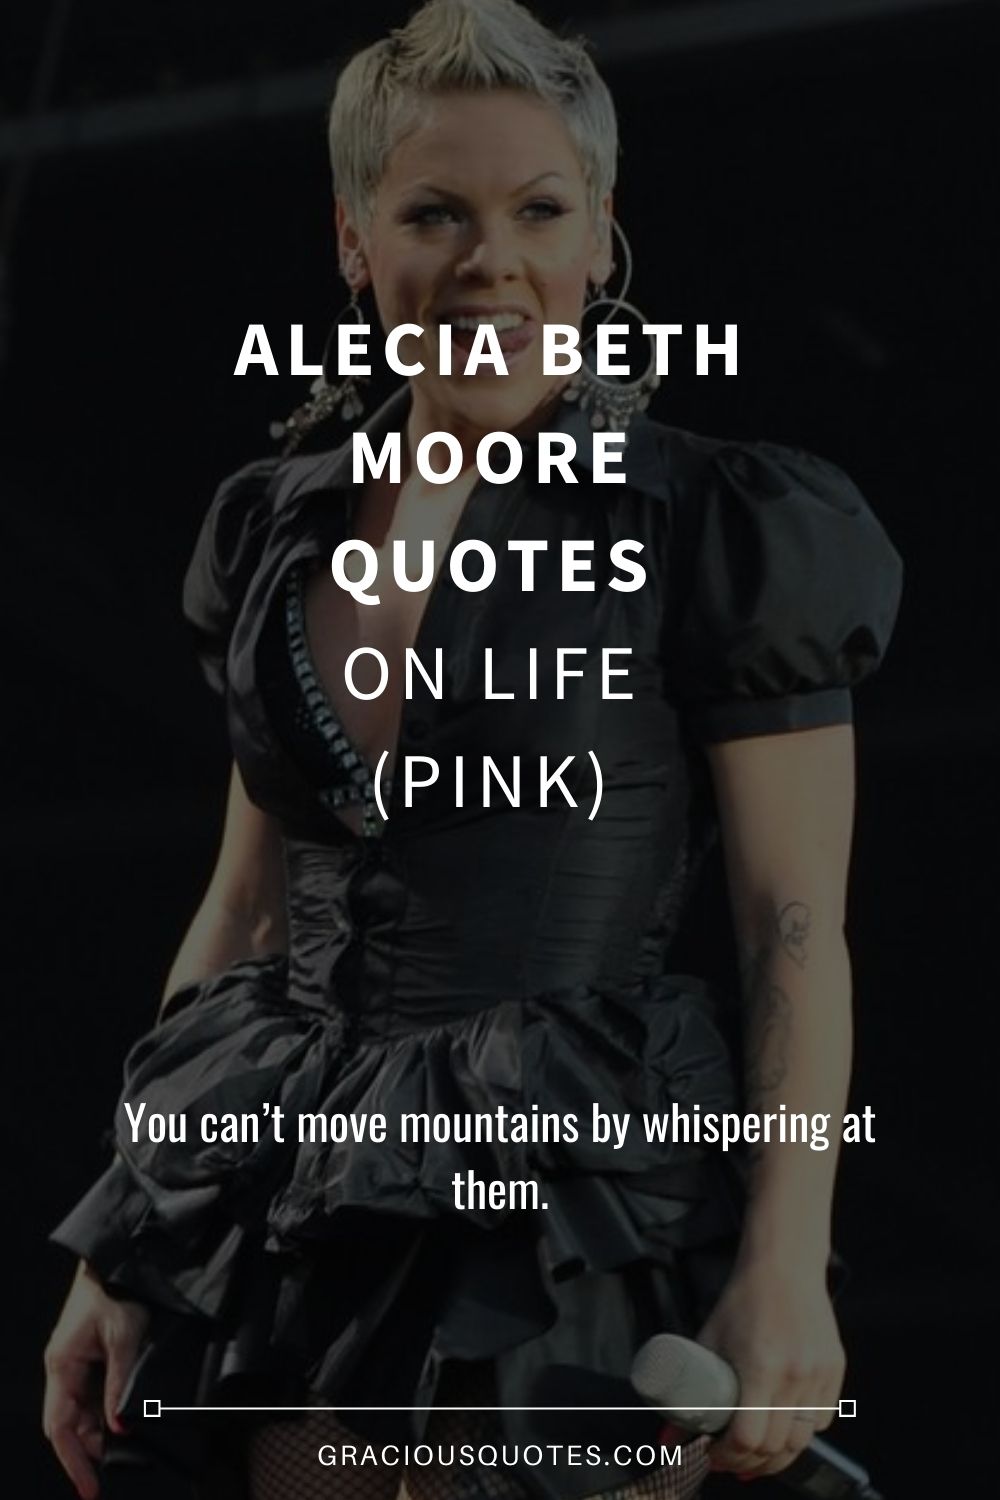 Alecia Beth Moore Quotes on Life (PINK) - Gracious Quotes